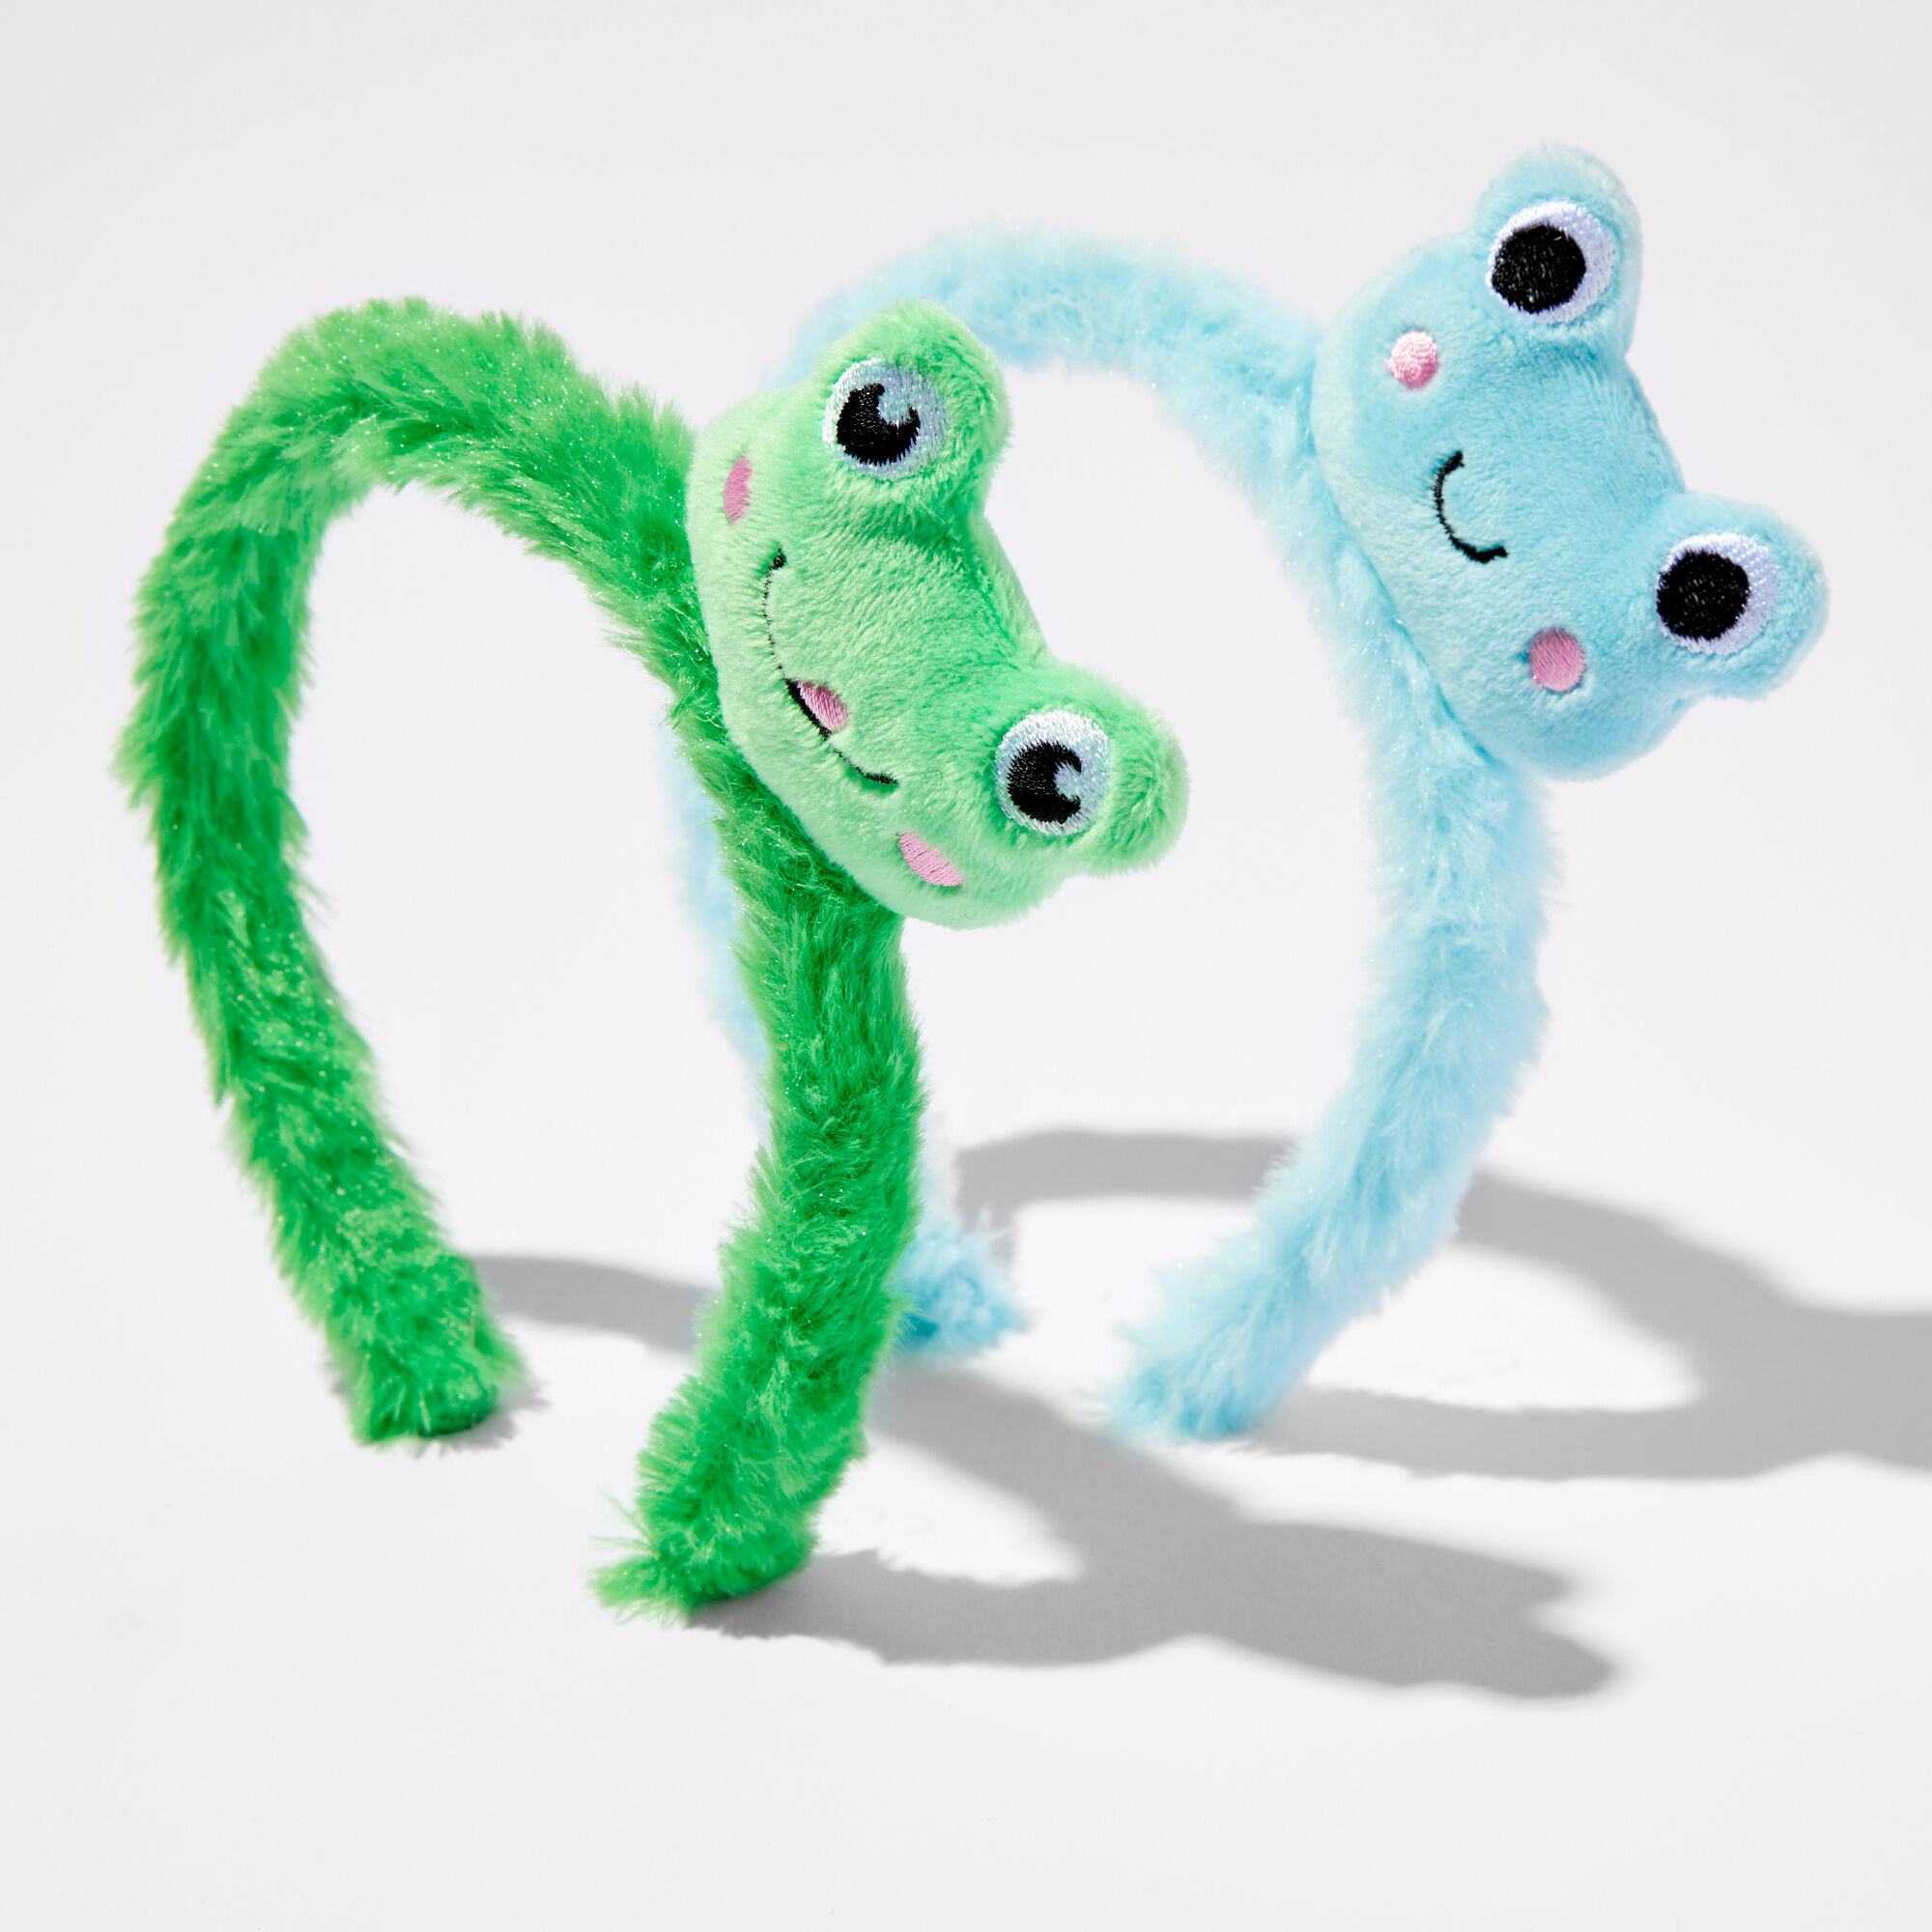 View Claires Club Plush Frog Headbands 2 Pack information